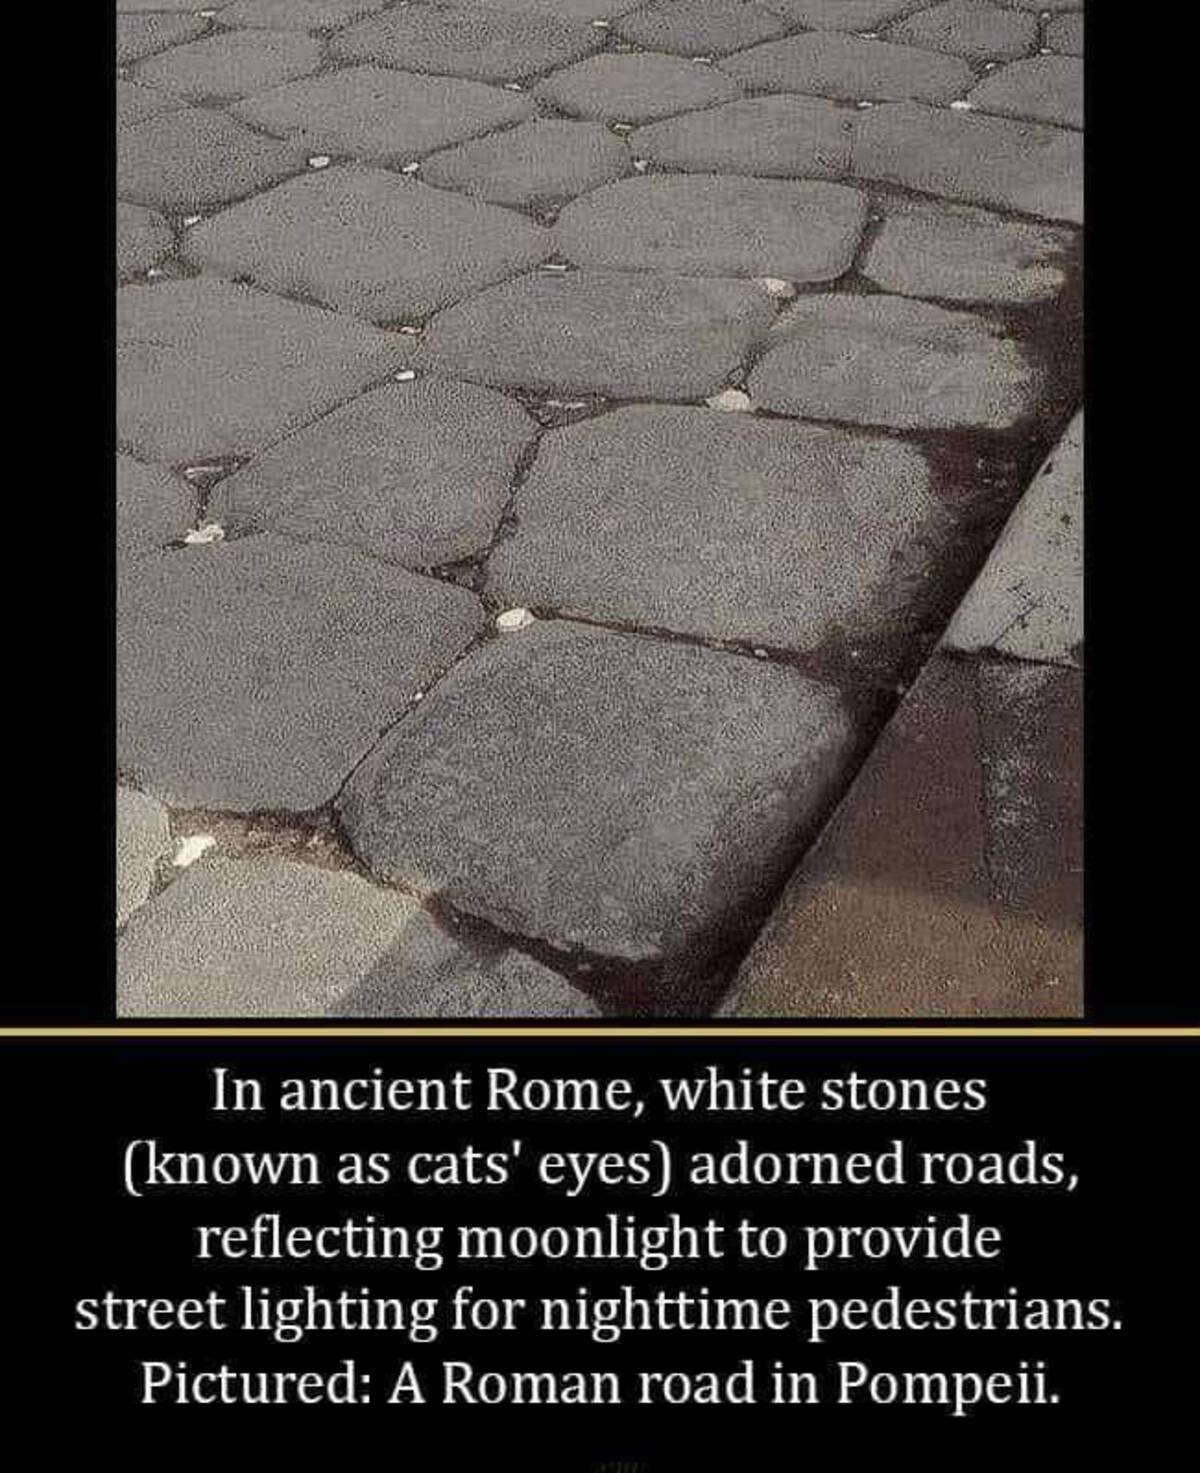 asphalt - In ancient Rome, white stones known as cats' eyes adorned roads, reflecting moonlight to provide street lighting for nighttime pedestrians. Pictured A Roman road in Pompeii.